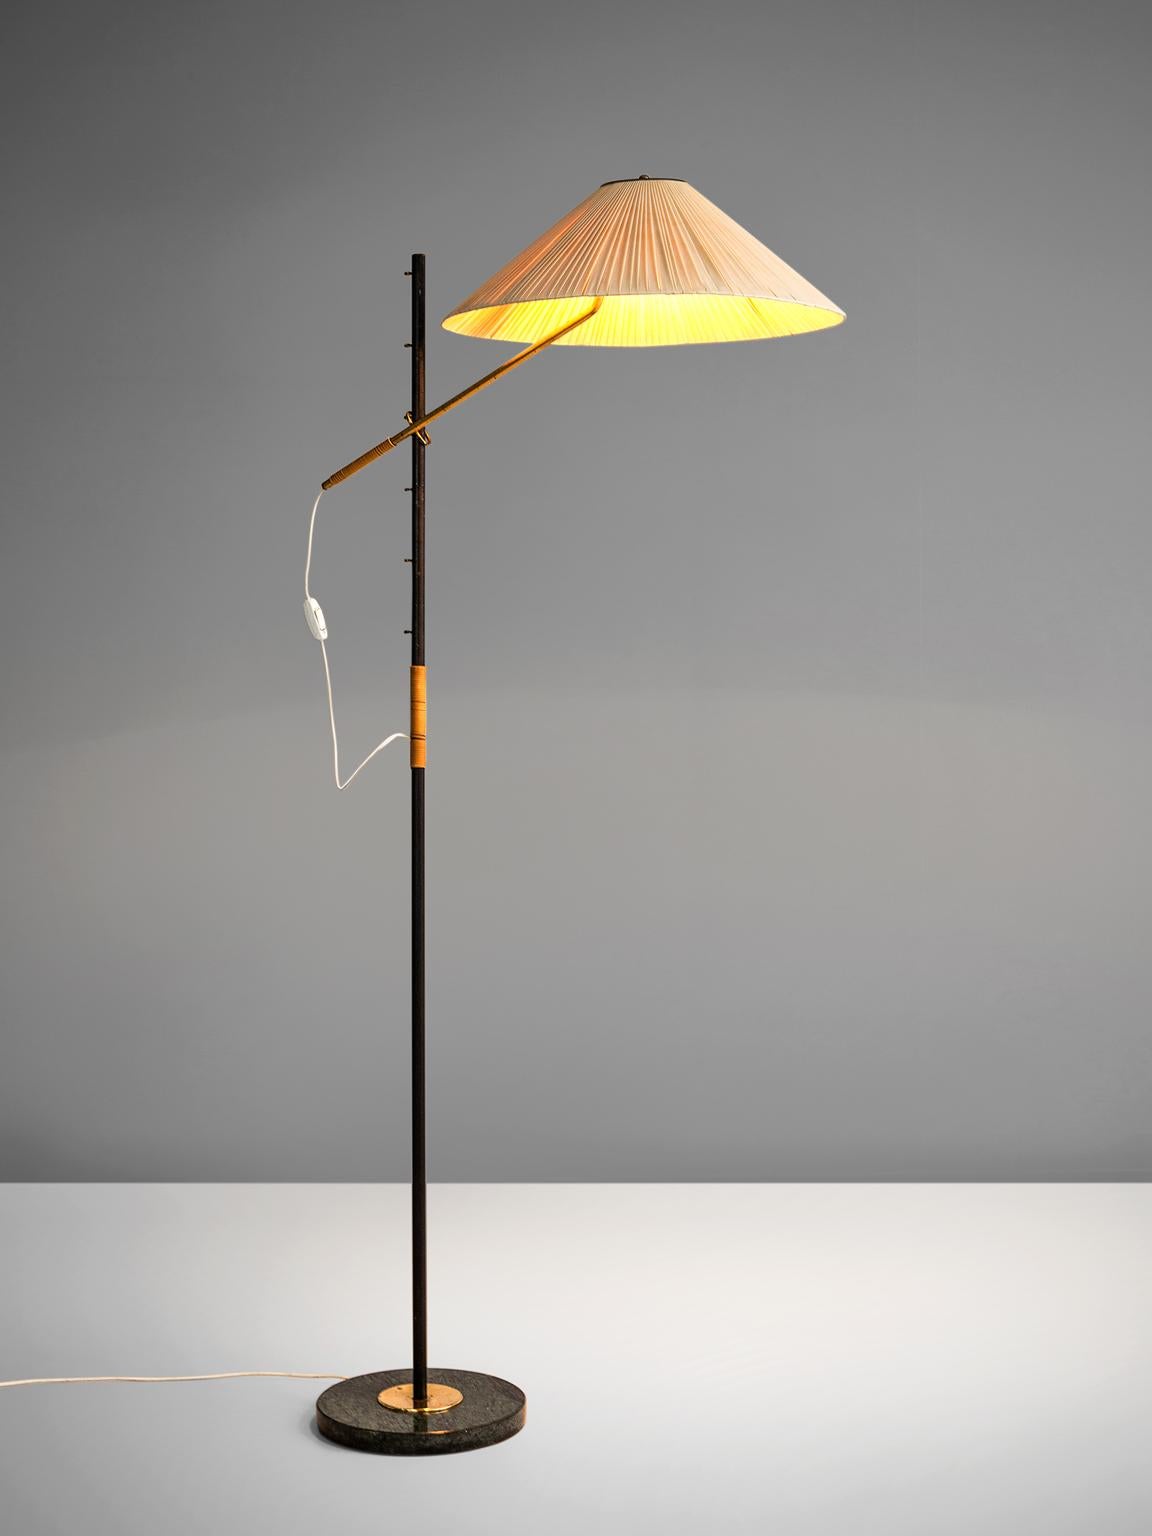 J.T. Kalmar, floor lamp 'Pelikan,' metal, fabric, green marble, brass, Austria, 1950s.

Slender floor lamp with green marble base. The shade is a traditional fabric shade with pleats. The metal stern is high and small and resembles a bird on one